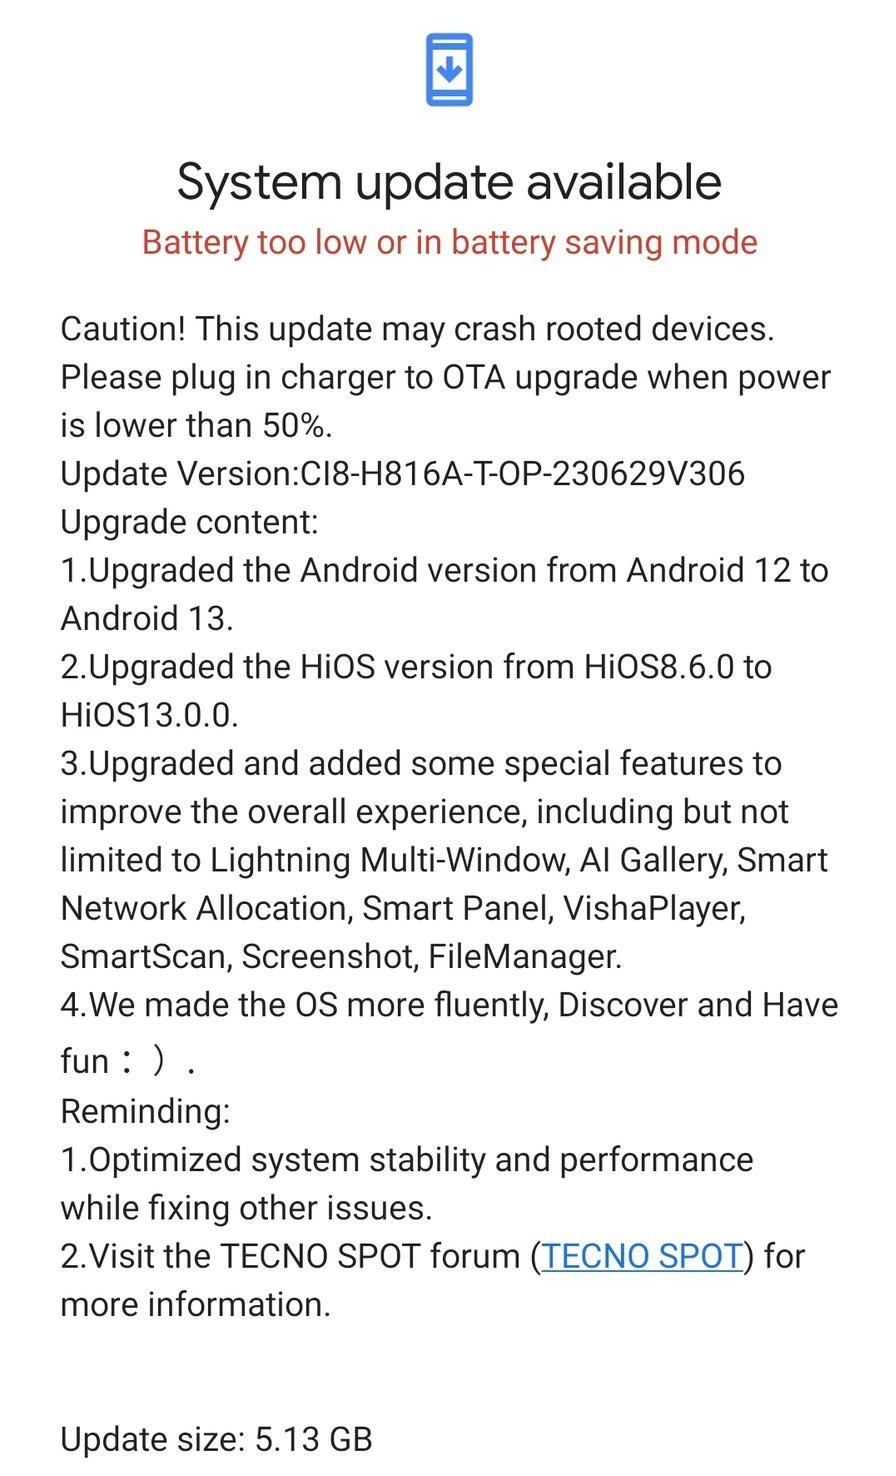 Tecno Camon 19 Pro 4G Model Now Receiving Google Android 13 Update Based on HiOS Version 13 | DroidAfrica